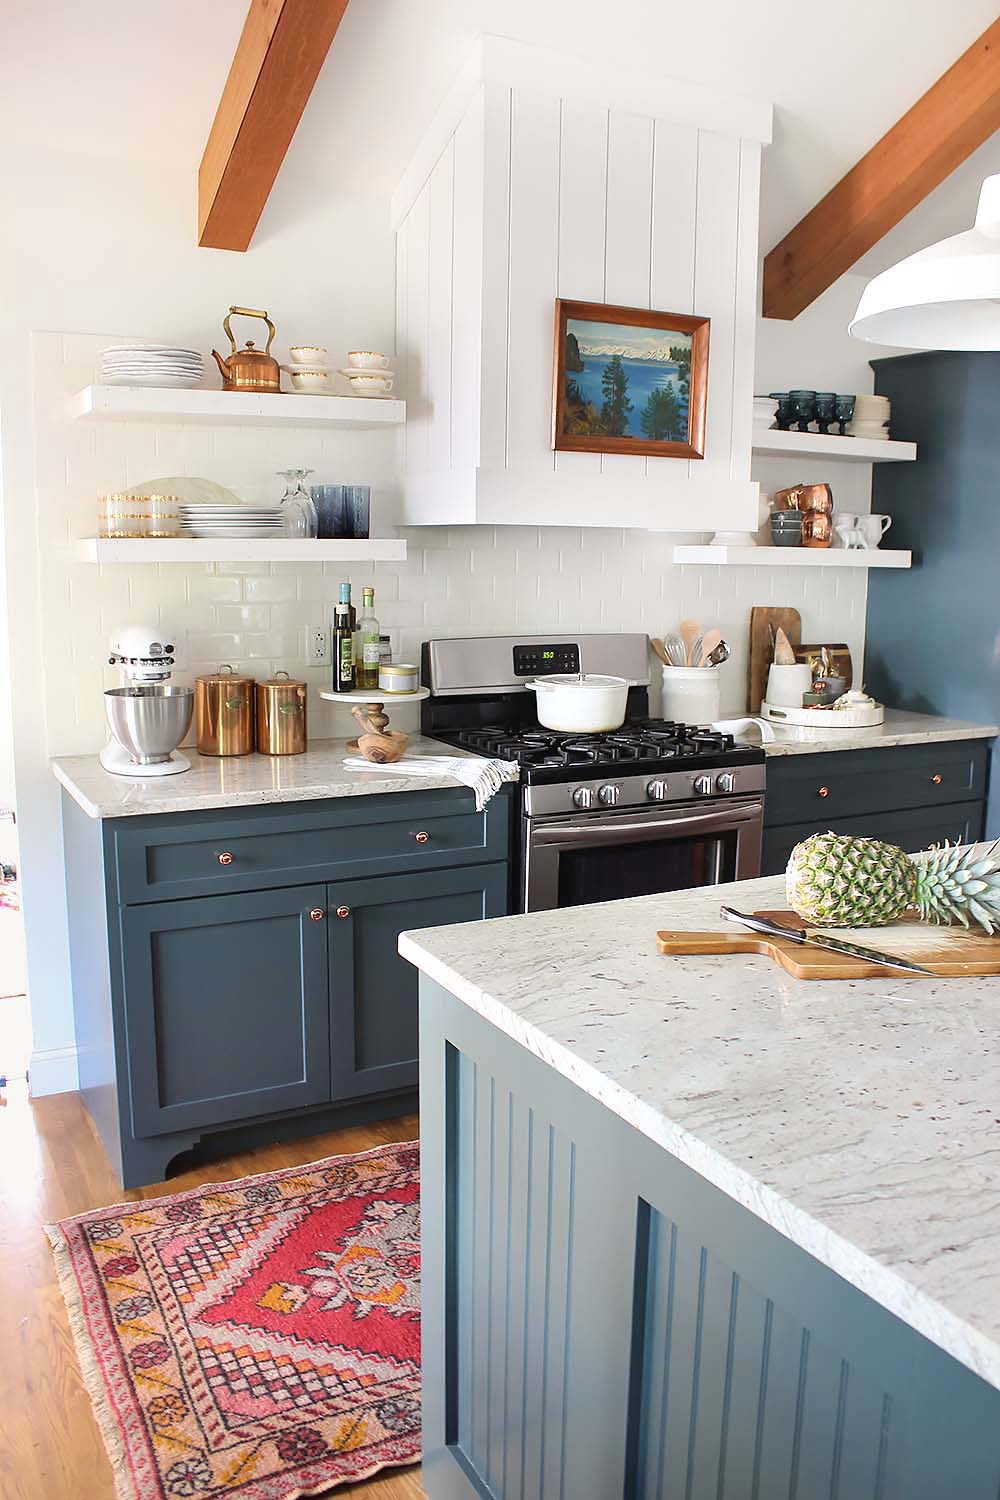 A blue - gray cabinets with wooden beams in farmhouse kitchen.